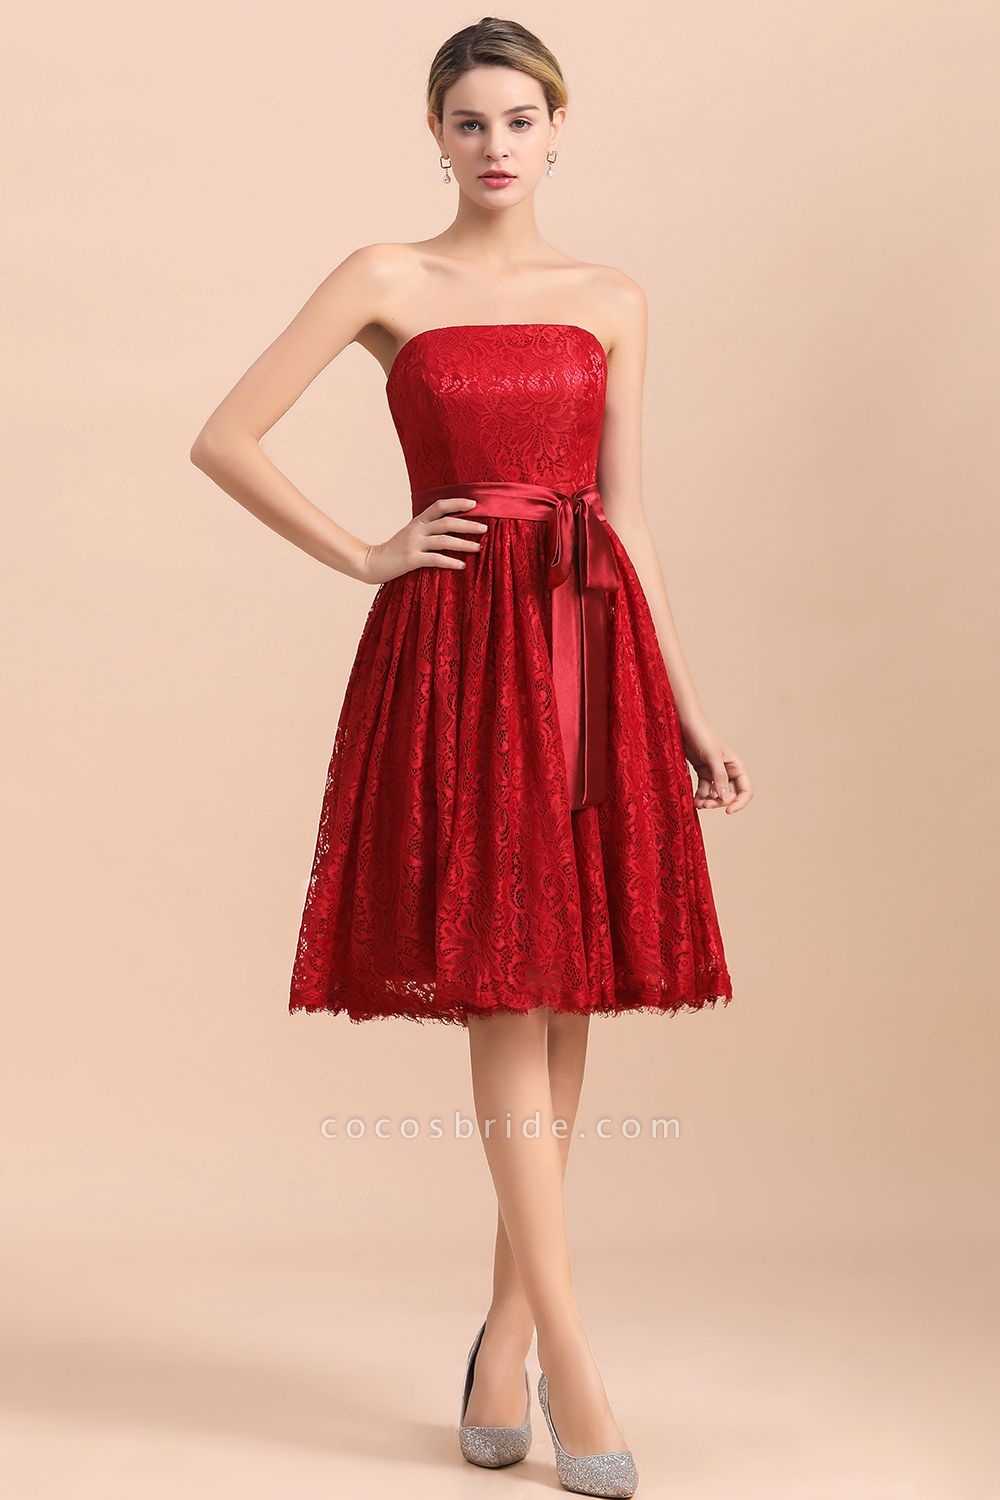 Stunning Red A-line Strapless Appliques Lace Knee-length Bridesmaid Dress With Bowknot